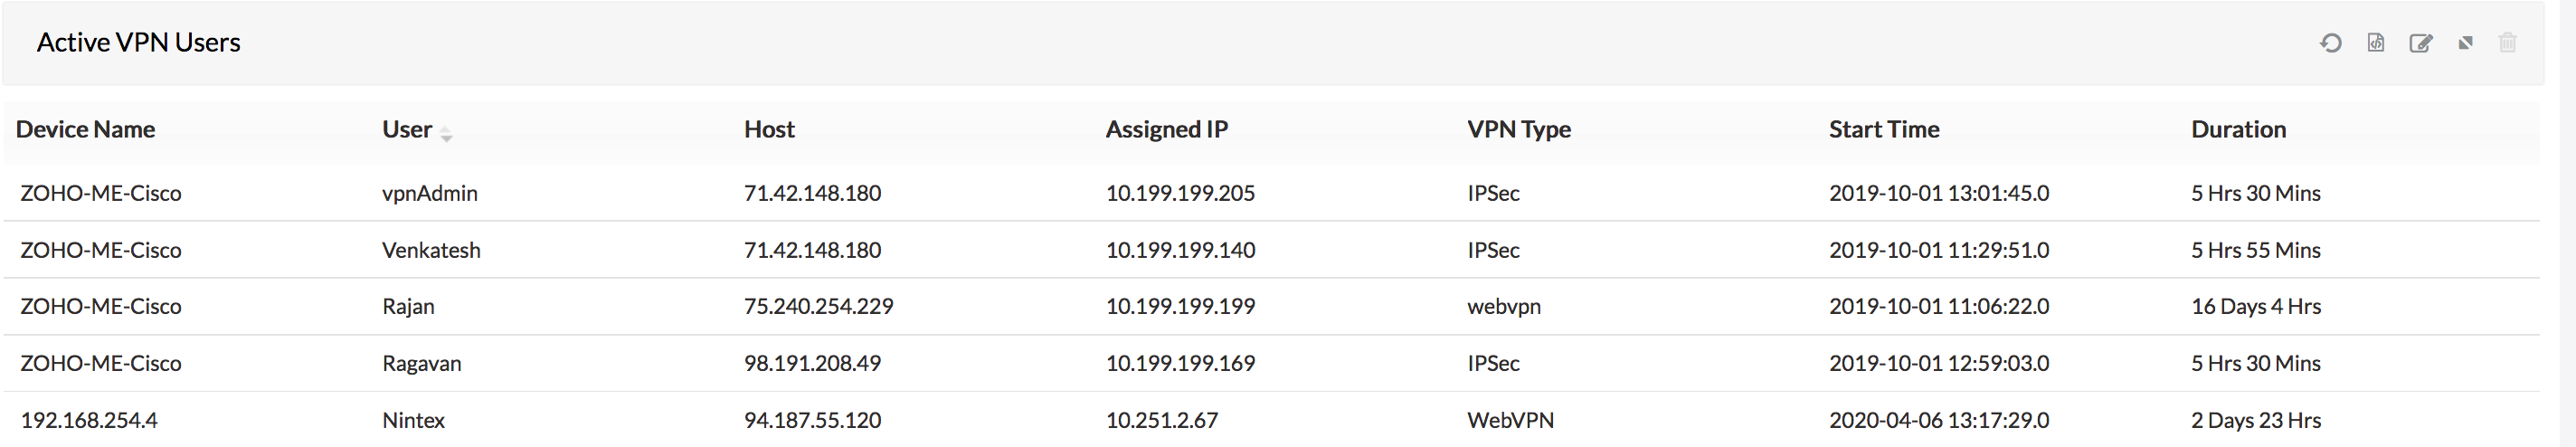 Monitor active VPN user sessions - Firewall Analyzer